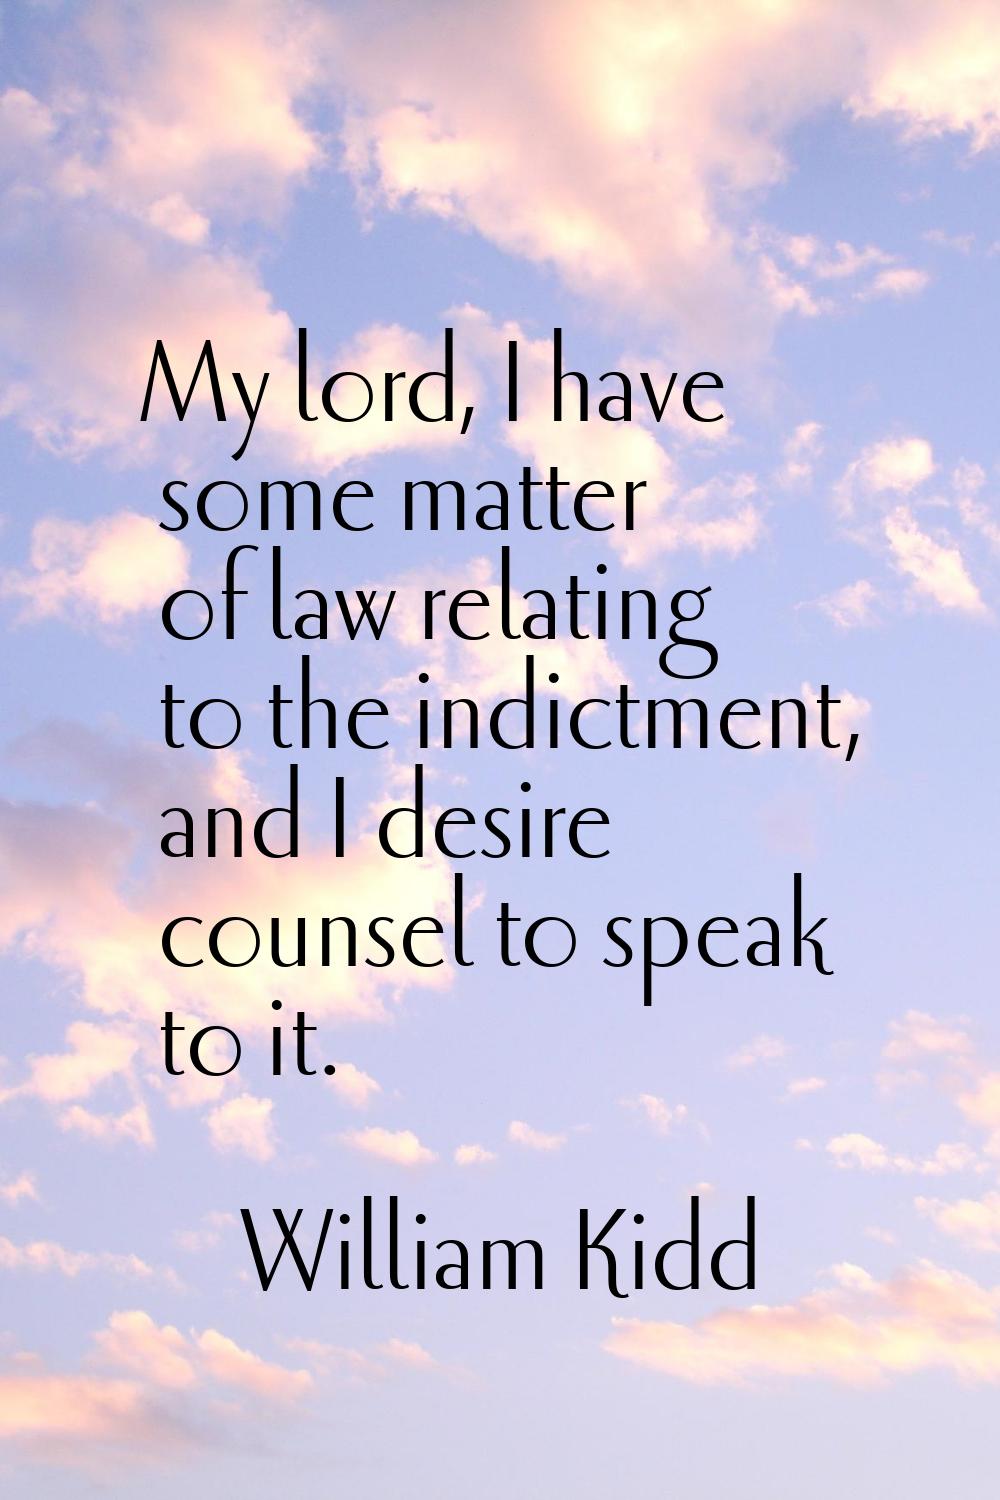 My lord, I have some matter of law relating to the indictment, and I desire counsel to speak to it.